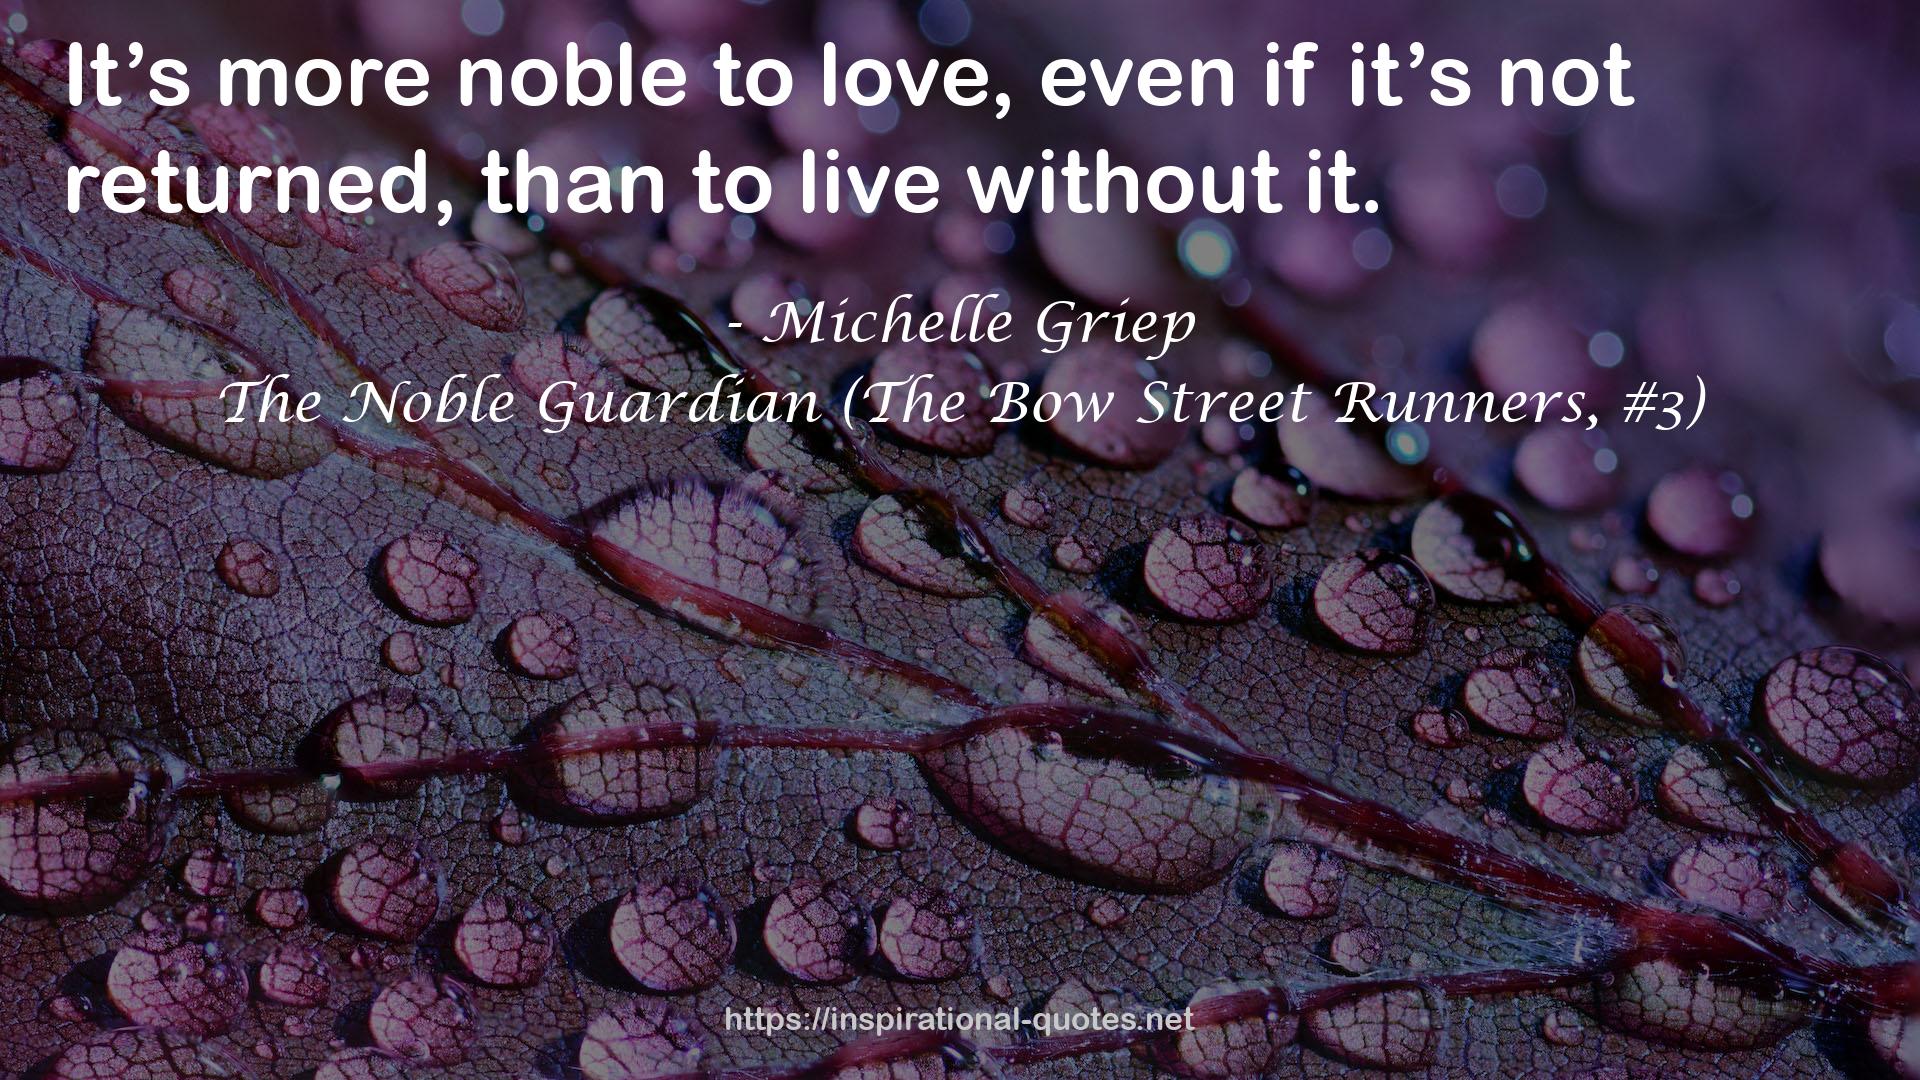 The Noble Guardian (The Bow Street Runners, #3) QUOTES